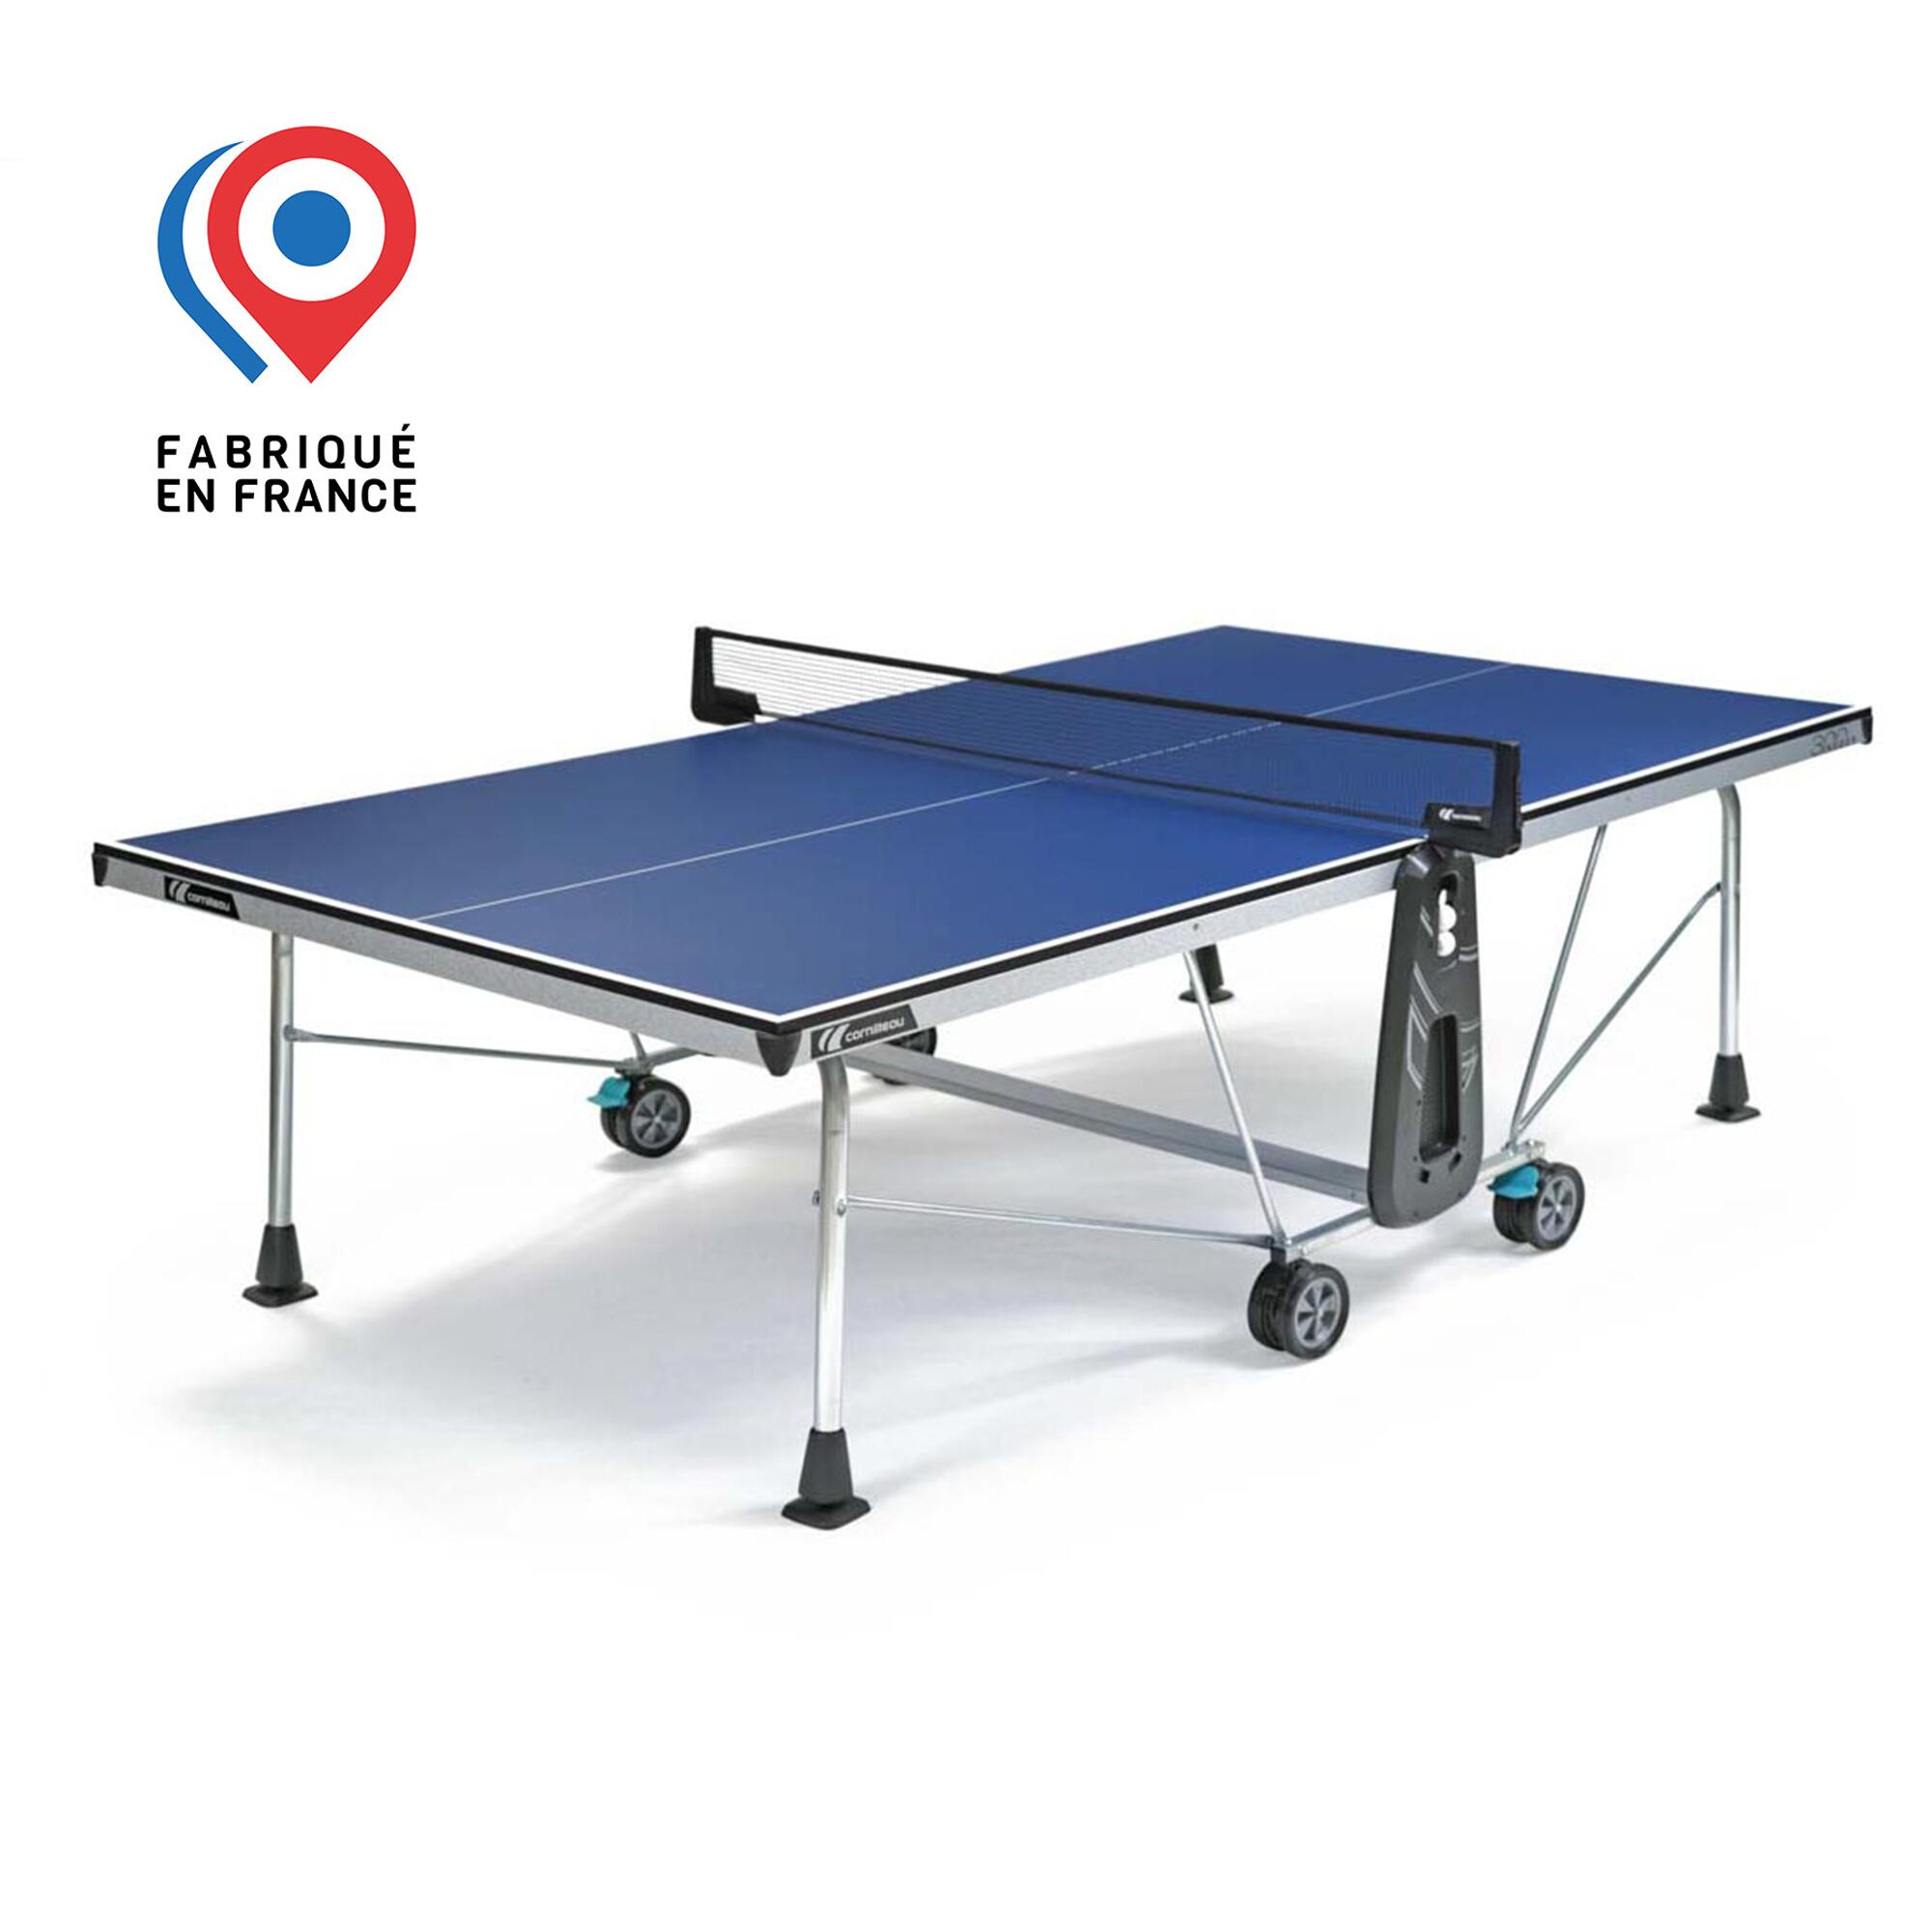 CORNILLEAU NEW 300 Indoor Table Tennis Table - Blue